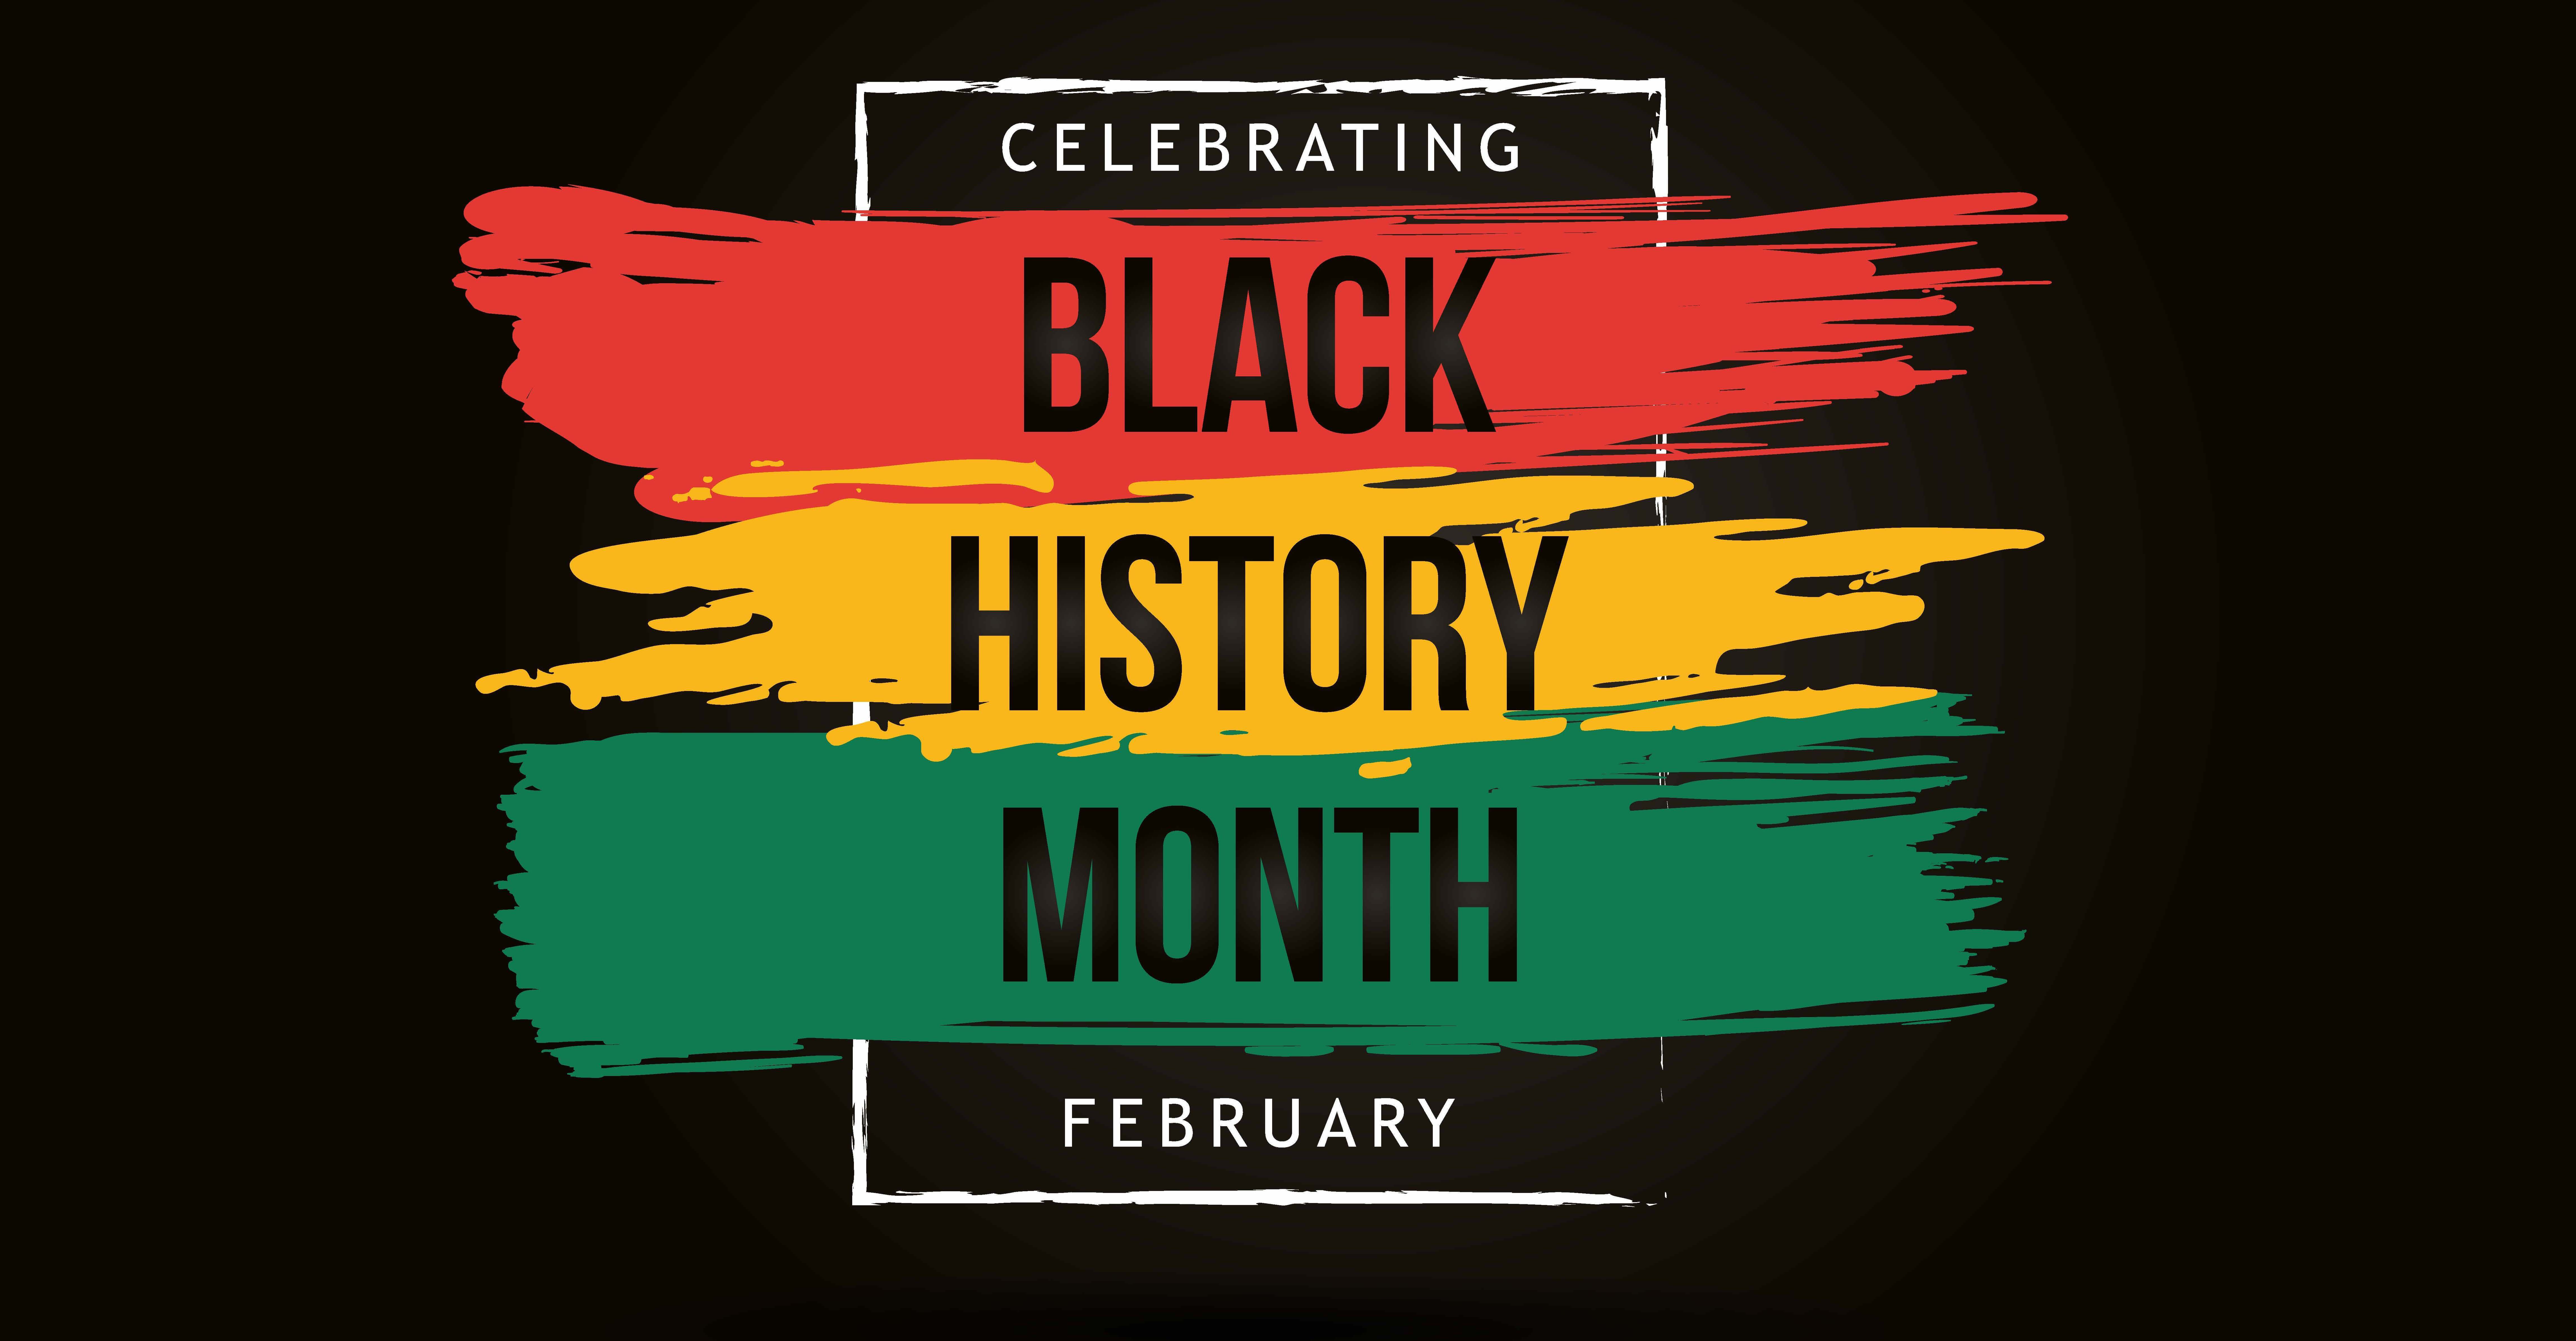 ‘Celebrating Black History Month’ with bright colors on a black background.